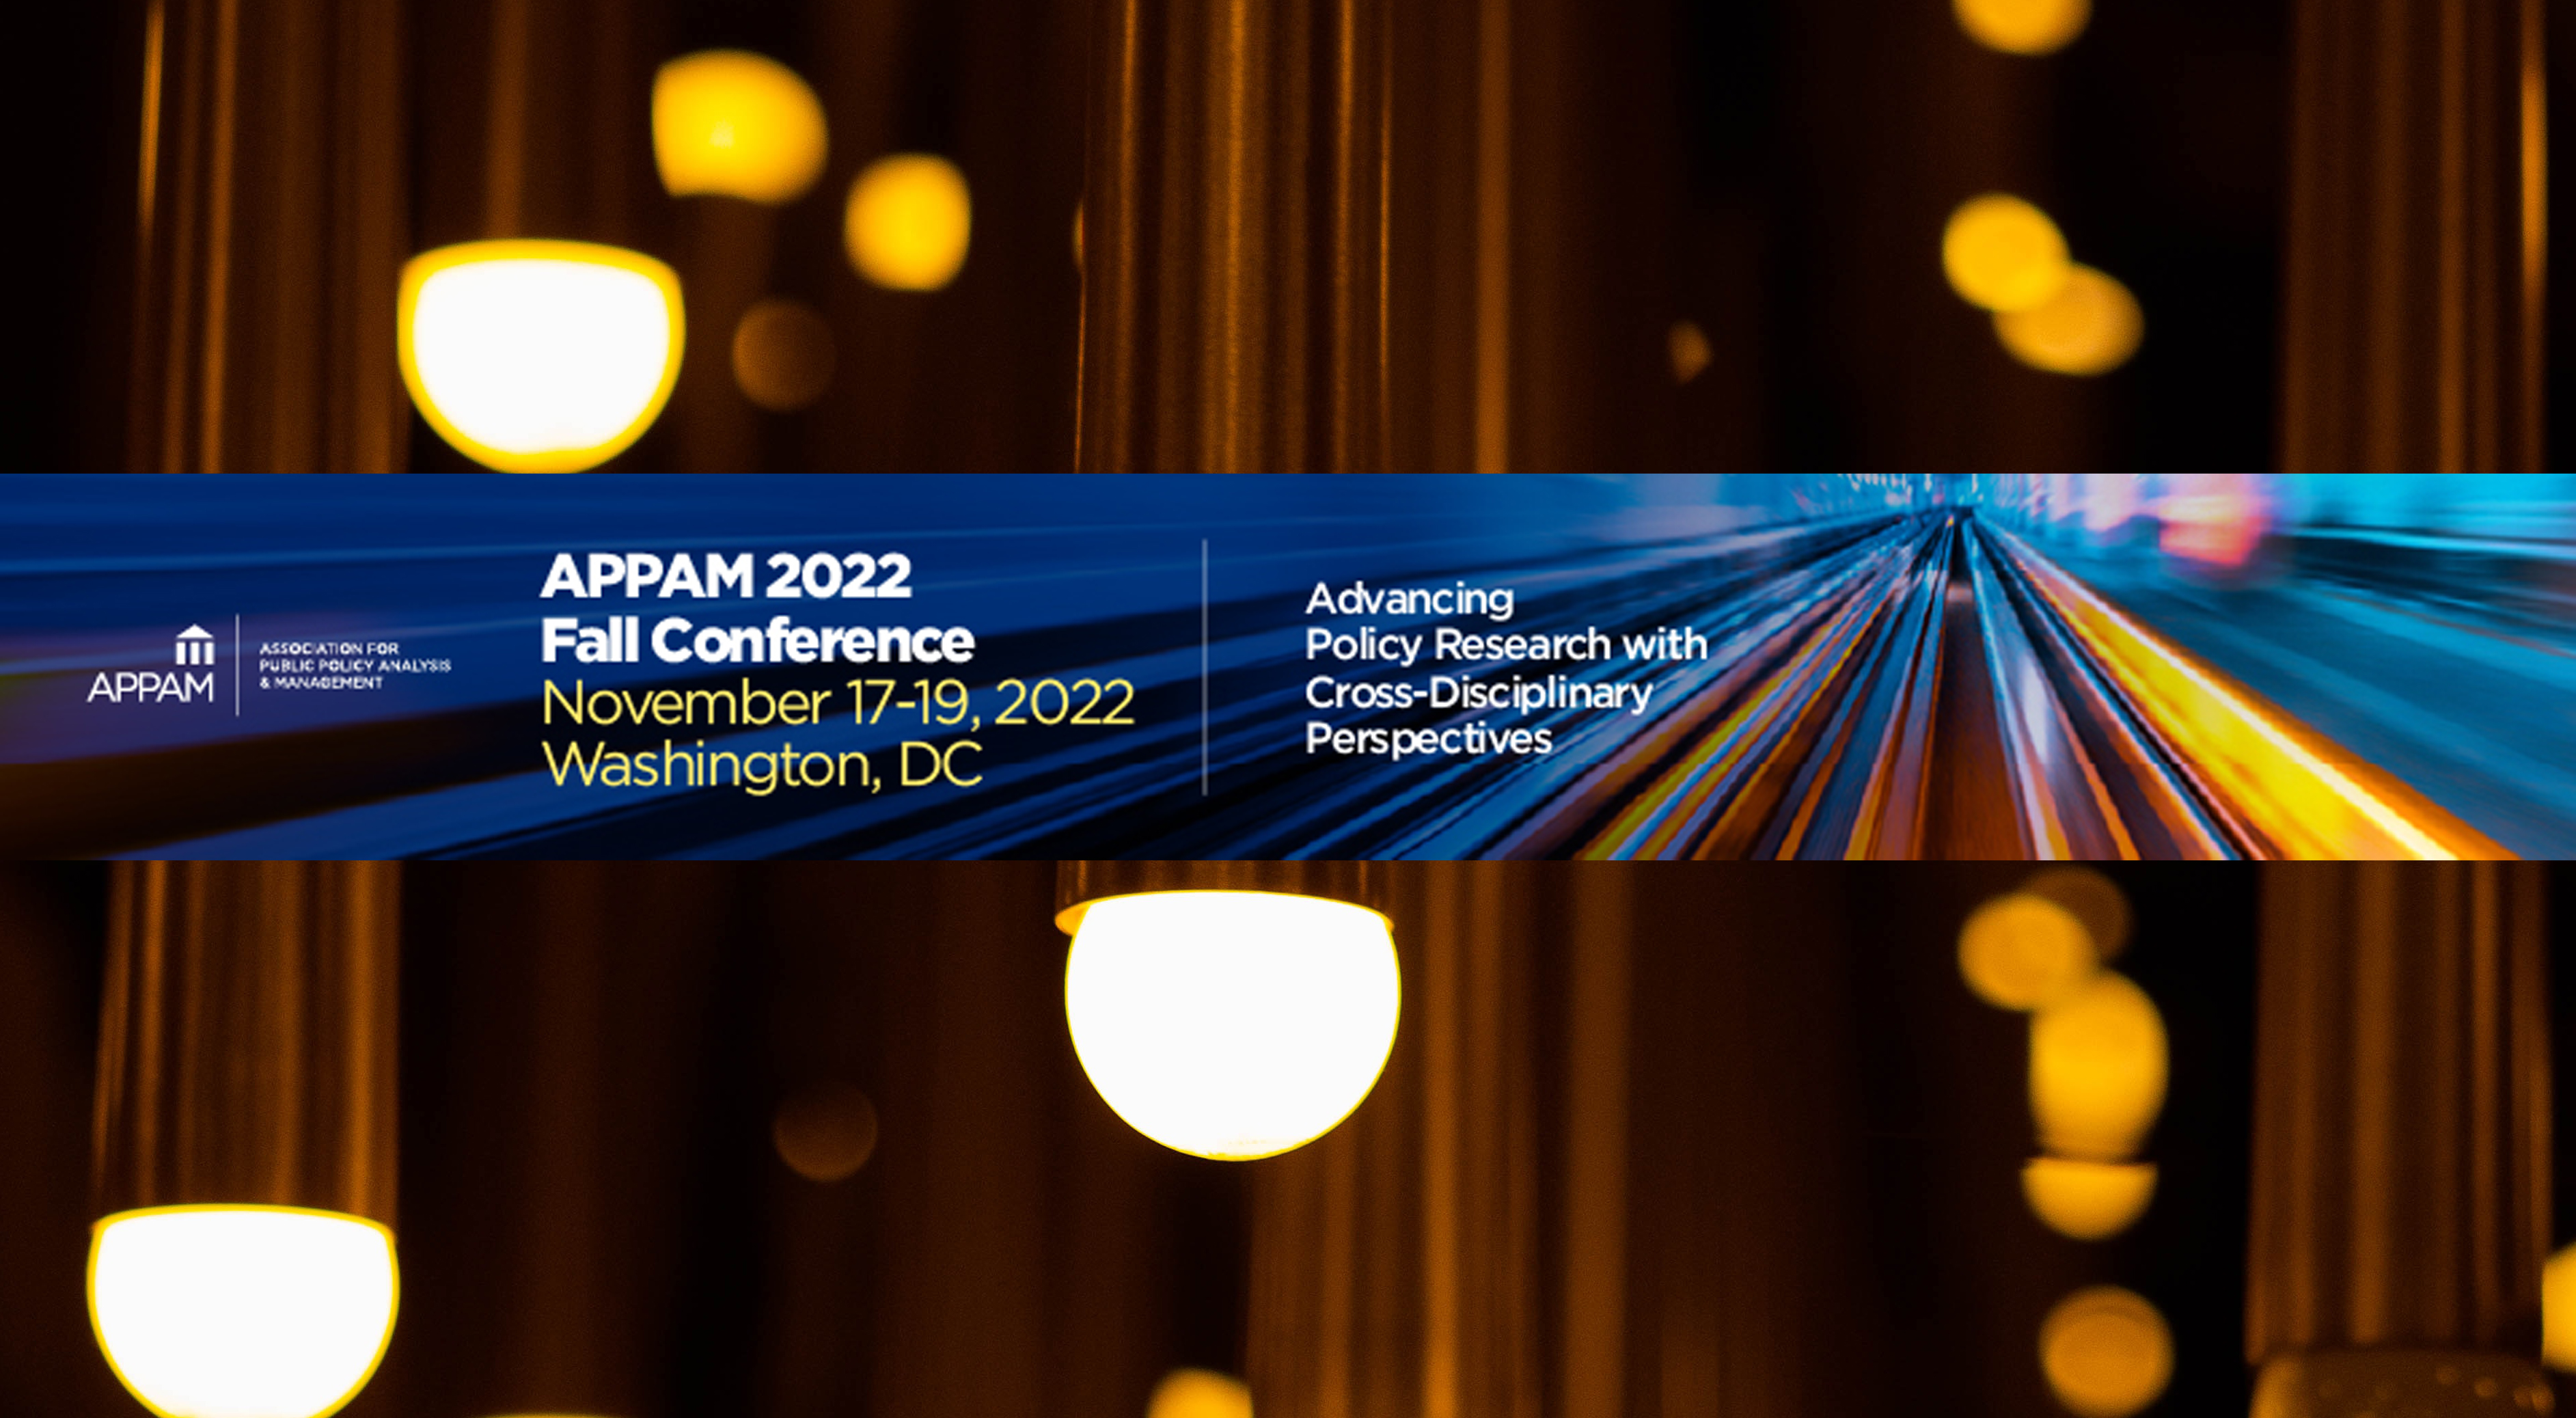 Banner for APPAM Fall Research Conference, over a background of a chandelier from the Washington Hilton hotel